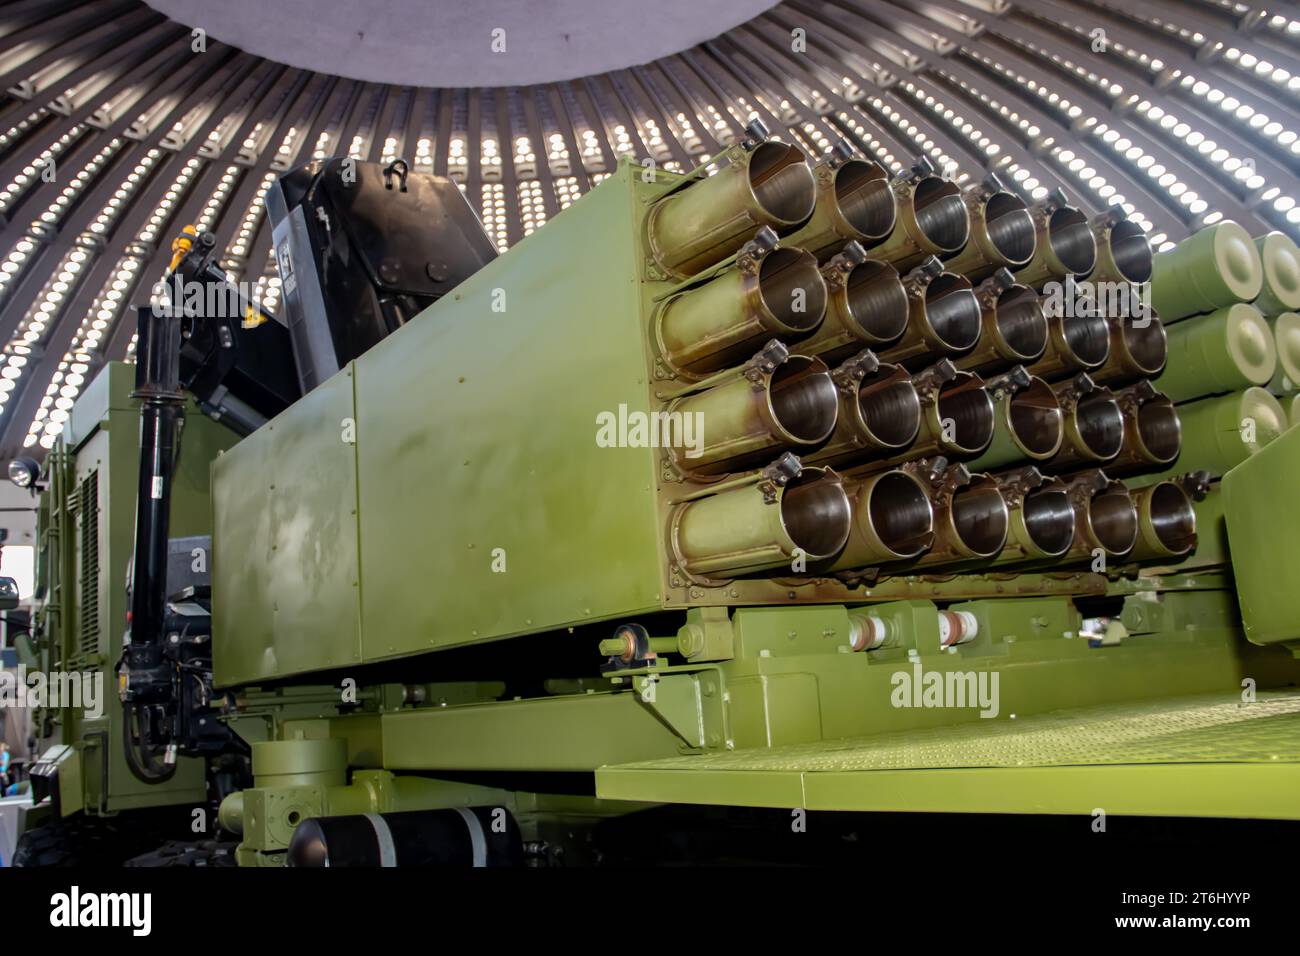 Multi-barrel rocket launcher (MRL) or multiple launch rocket system (MLRS) with32 launch tubes of caliber 128 mm, war military equipment, exposed Stock Photo